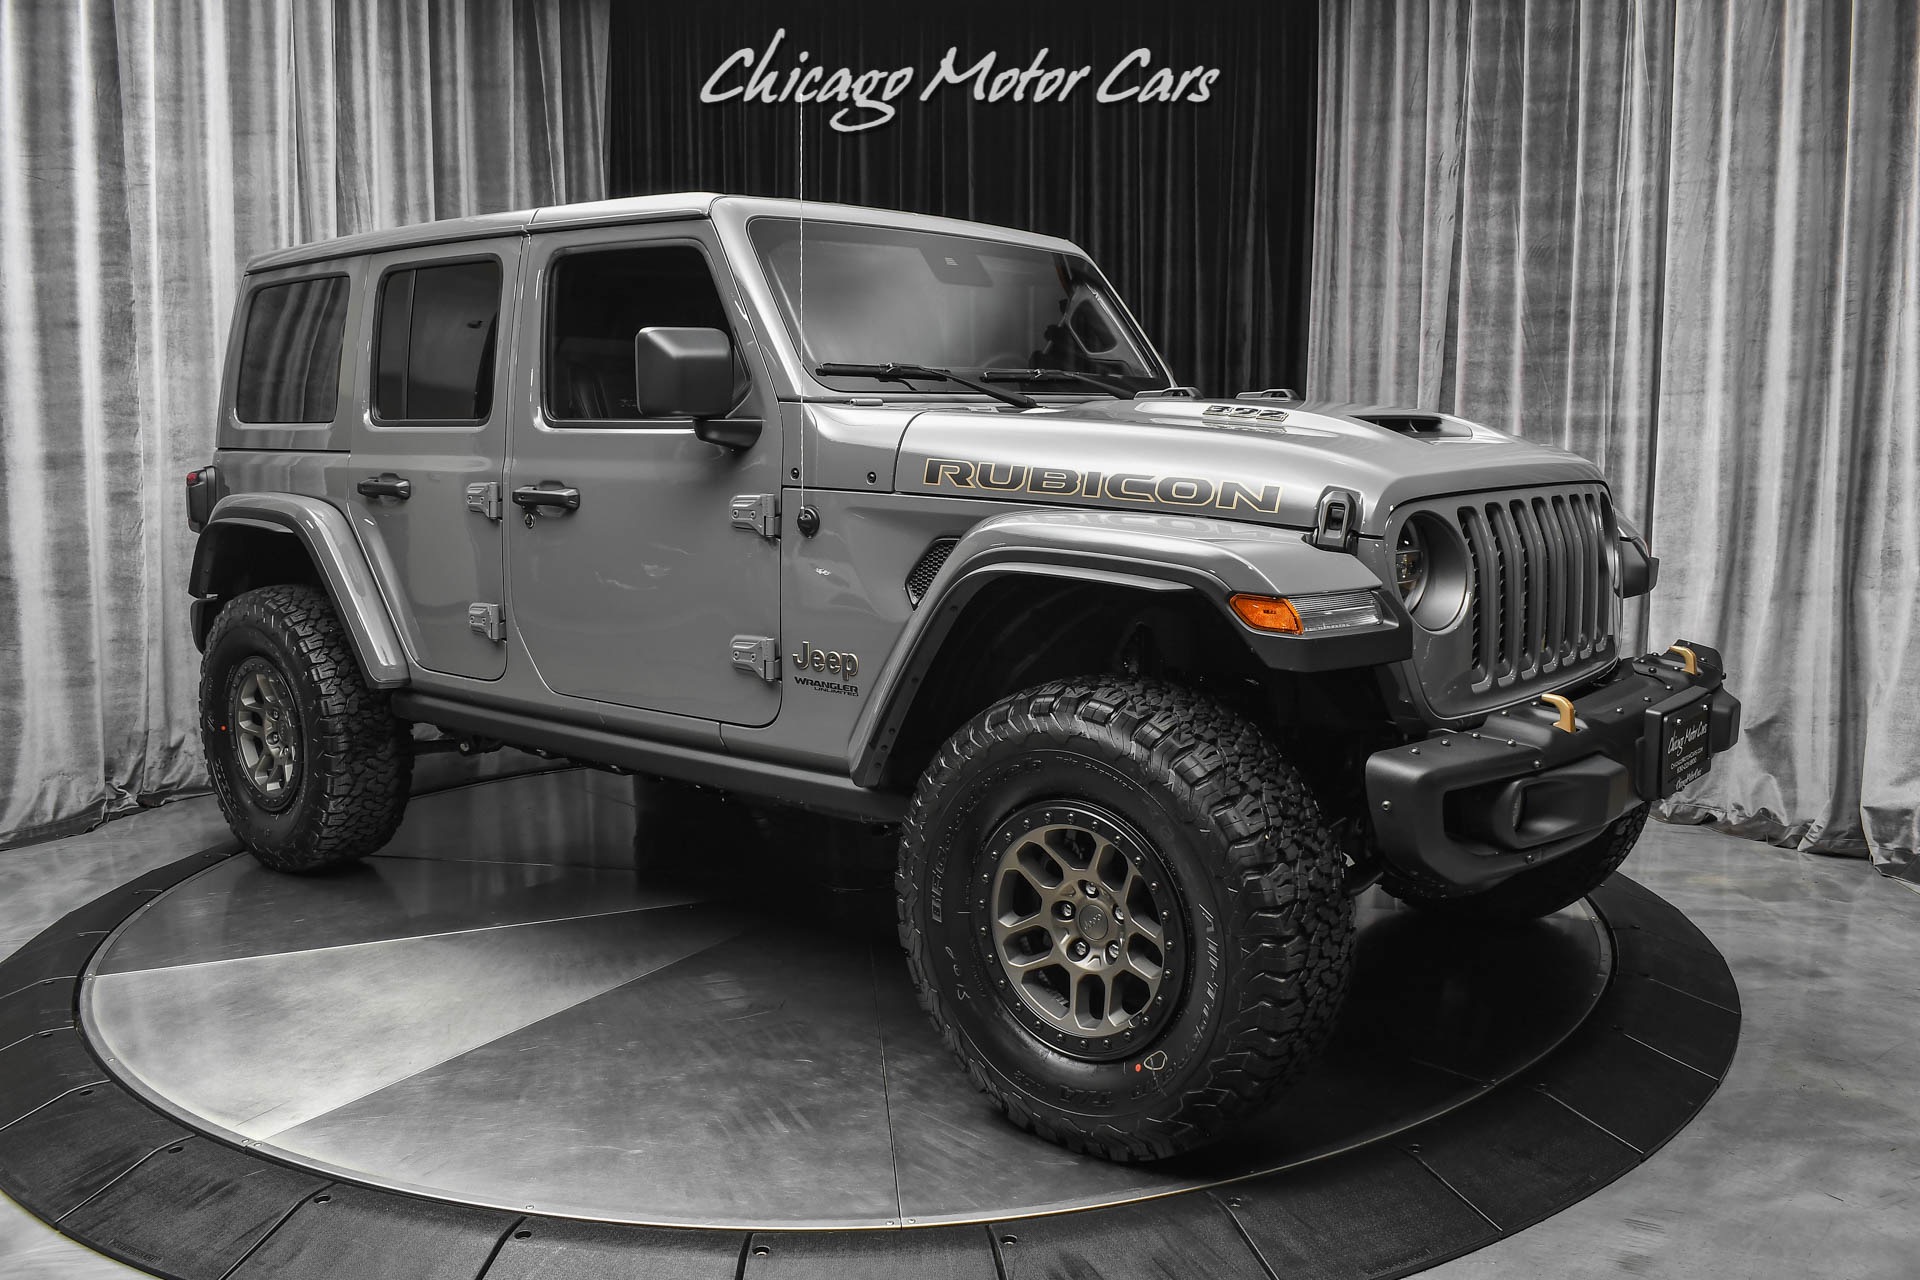 Used 2021 Jeep Wrangler Unlimited Rubicon 392 Xtreme Recon Package Sting  Gray Hemi V8 470HP For Sale (Special Pricing) | Chicago Motor Cars Stock  #19430